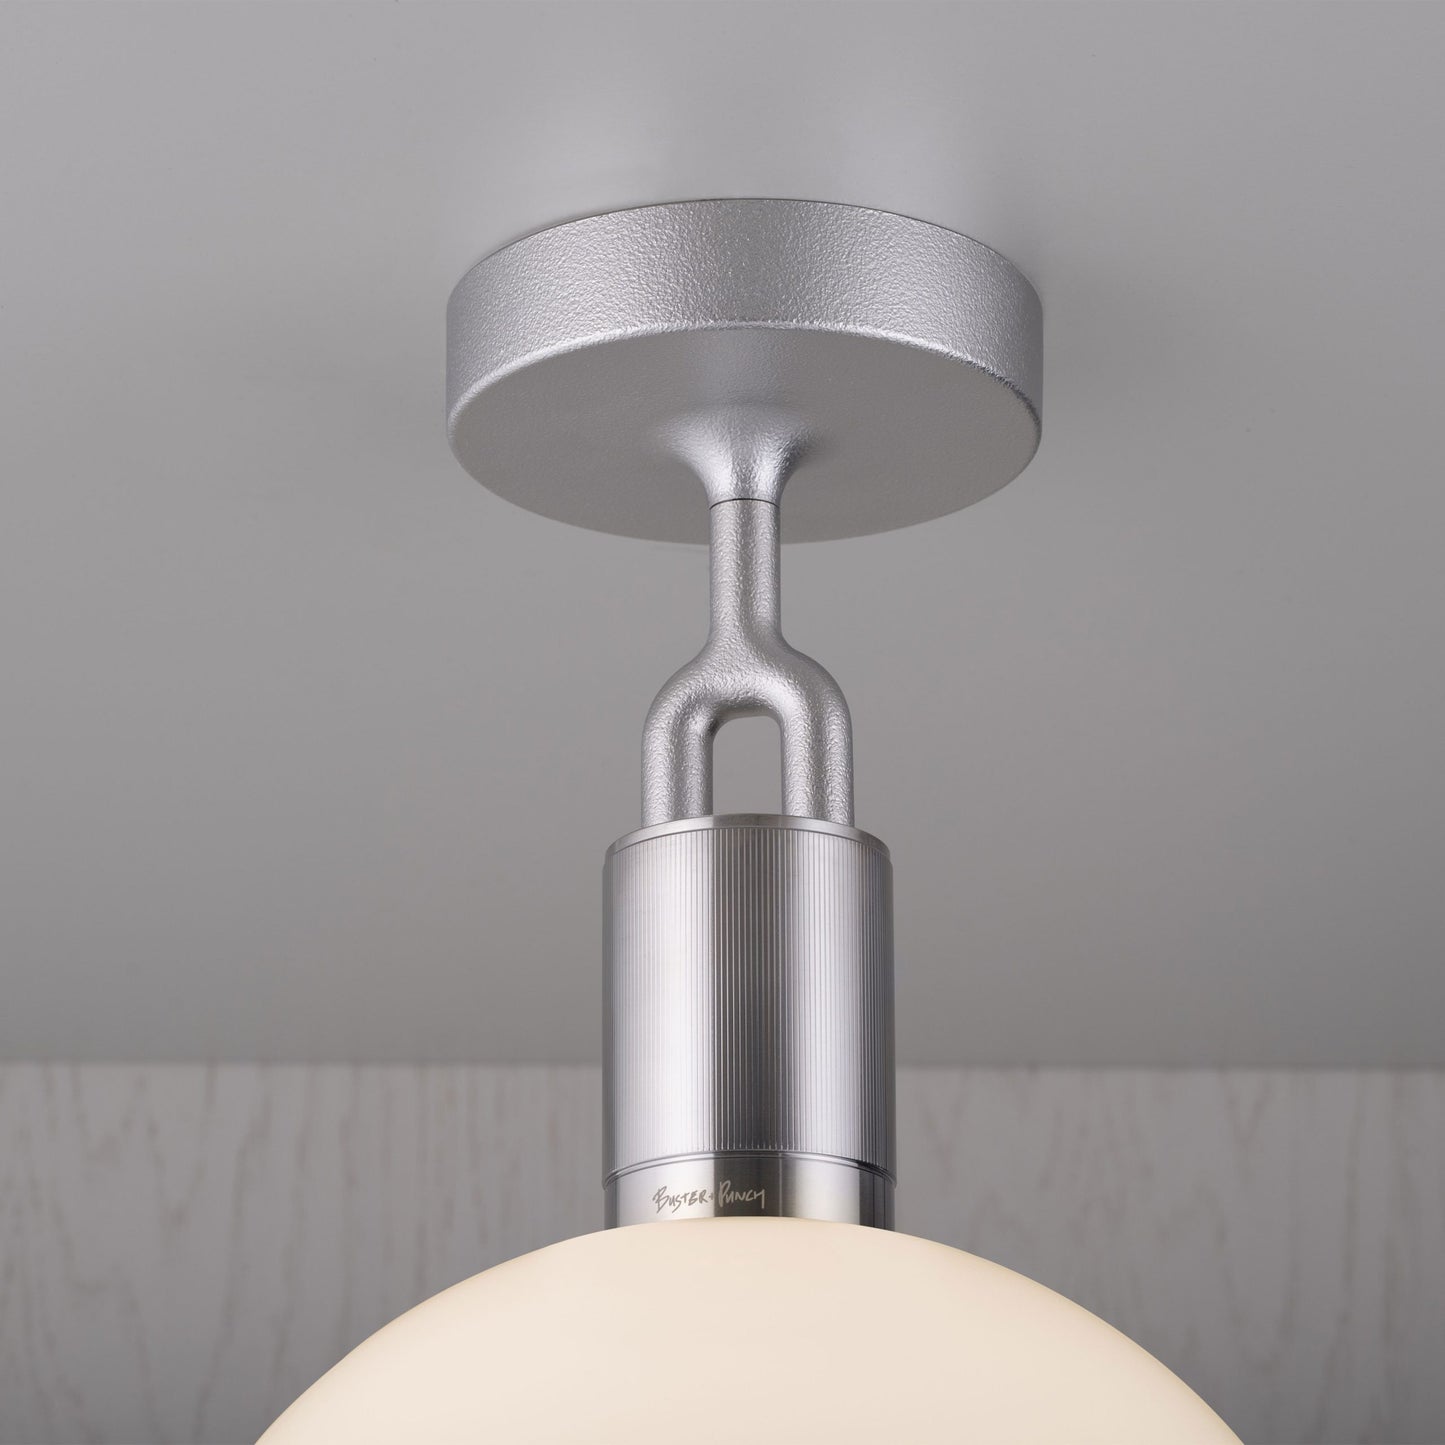 Forked Ceiling Light / Globe / Opal / Medium Steel, detailed close up of fork and fitting.